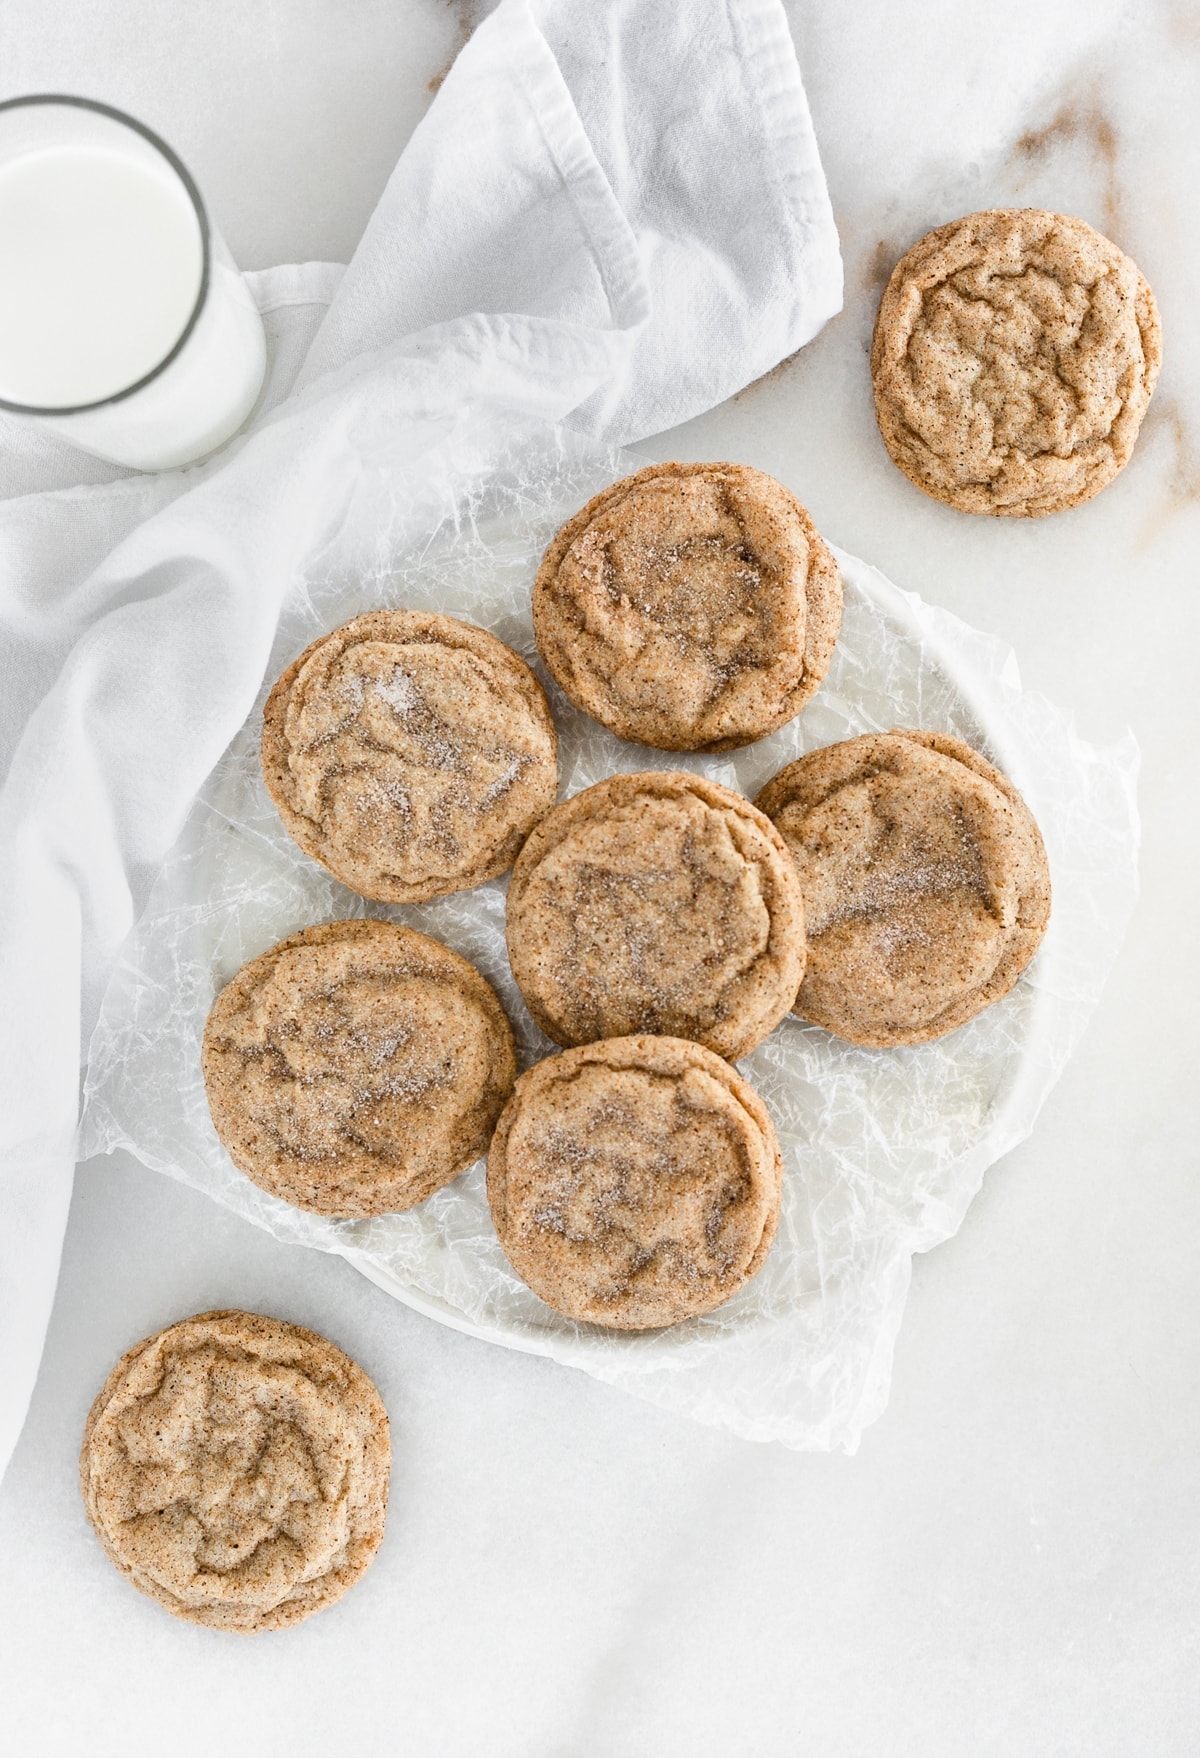 Chai Spiced Snickerdoodles have soft and buttery insides and sweet and spicy, slightly crunchy outsides. The perfect cookies for pairing with a cup of tea. (vegetarian, dairy-free option)